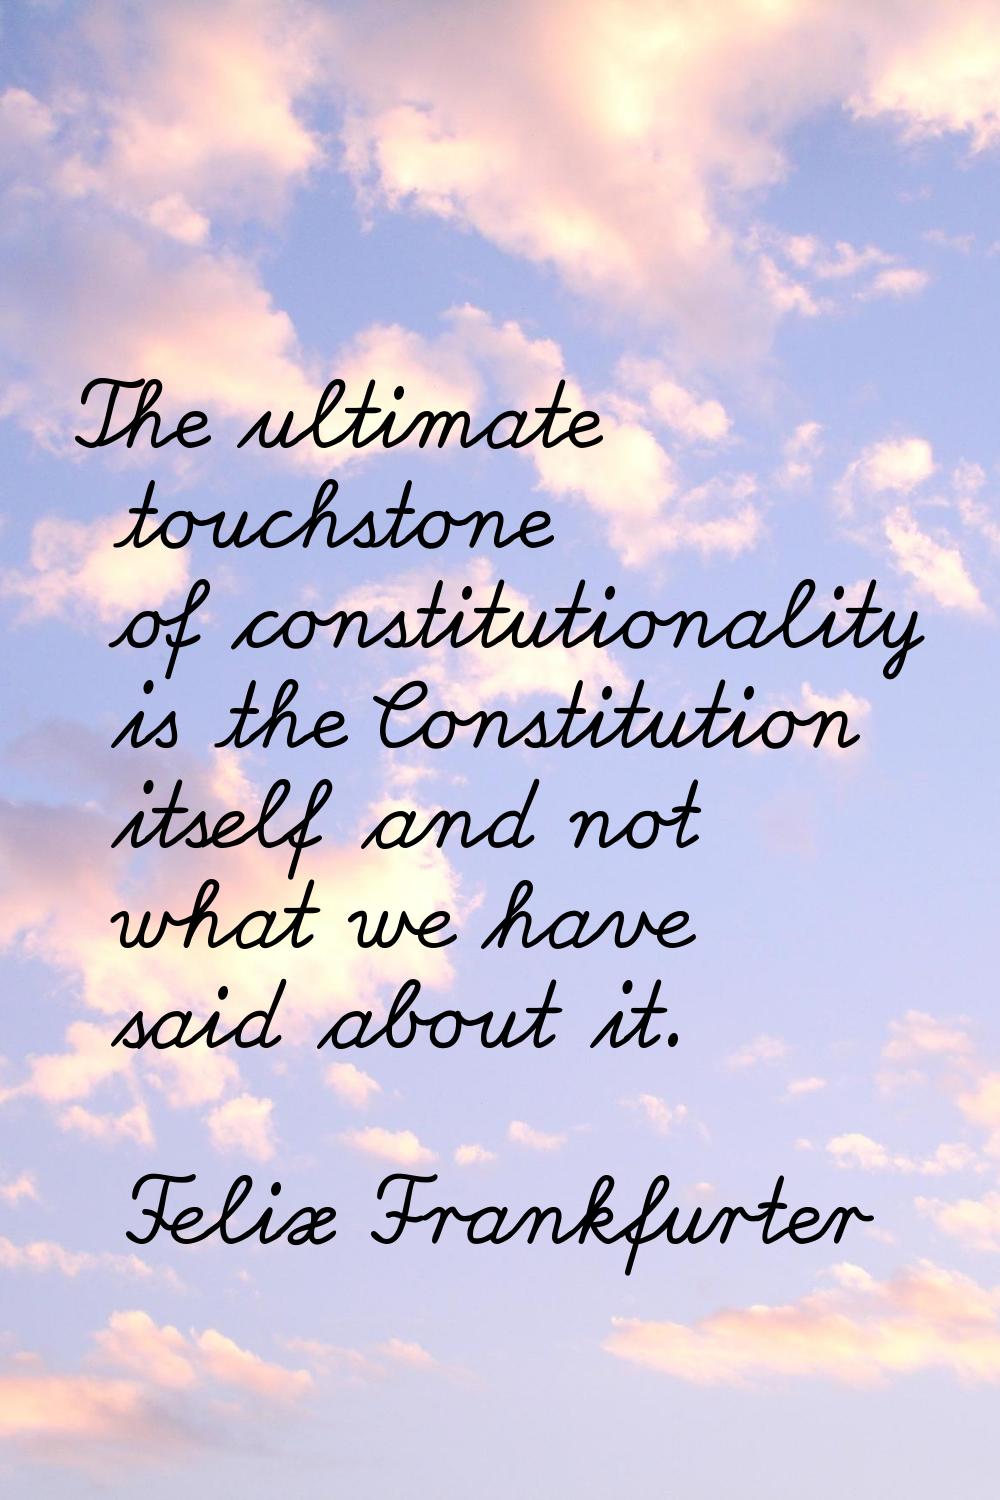 The ultimate touchstone of constitutionality is the Constitution itself and not what we have said a